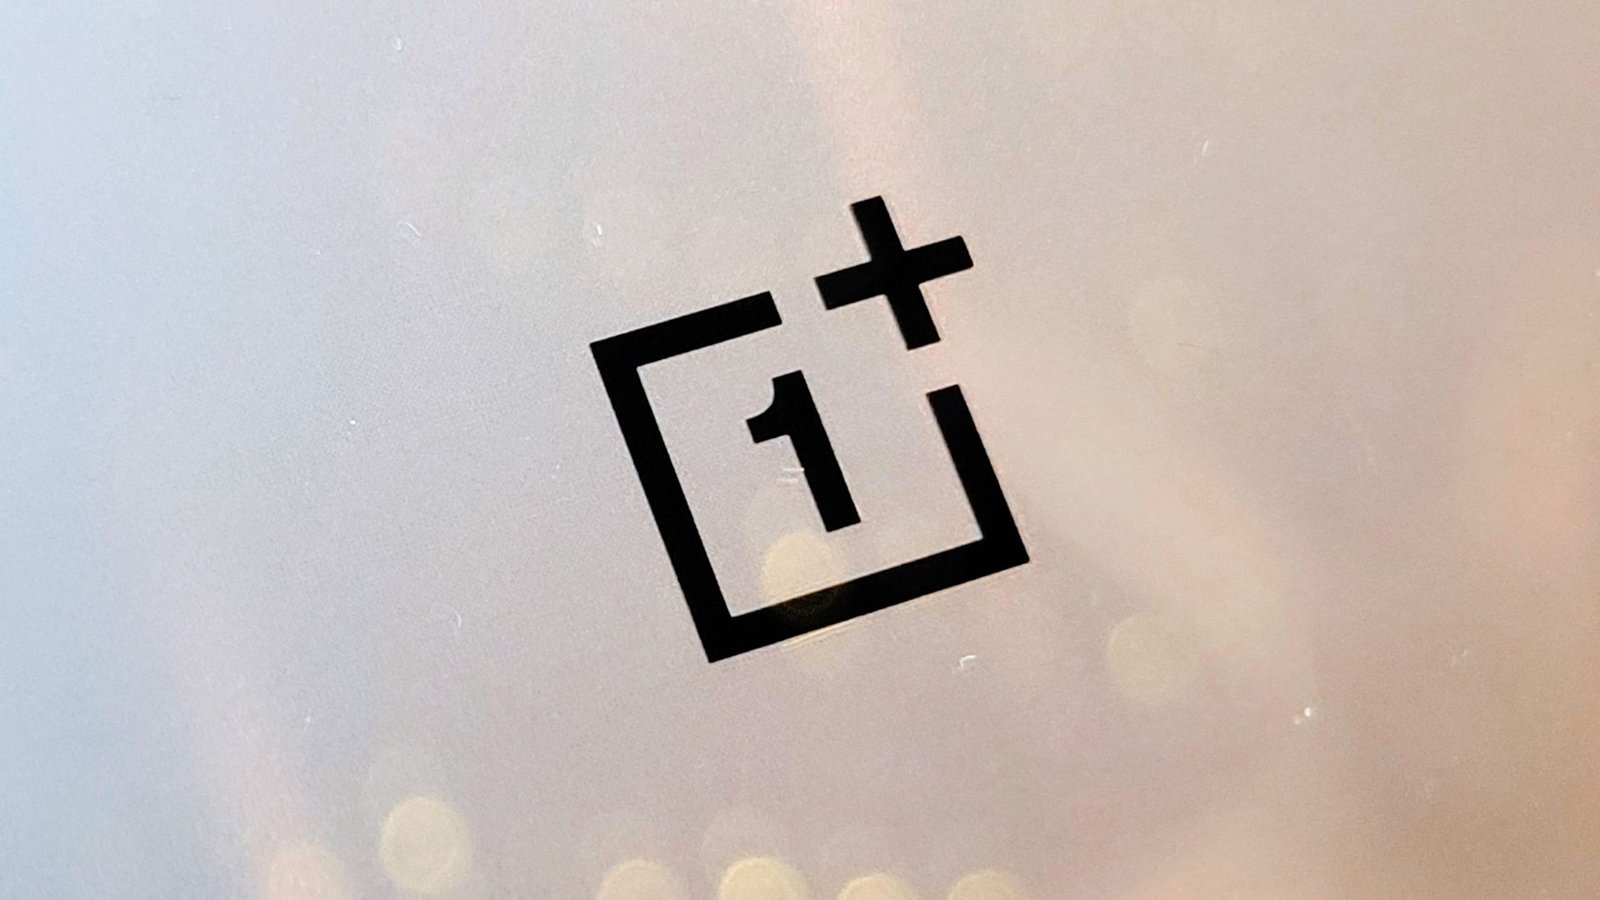 OnePlus might be bringing metal unibody phones back, and it looks weird